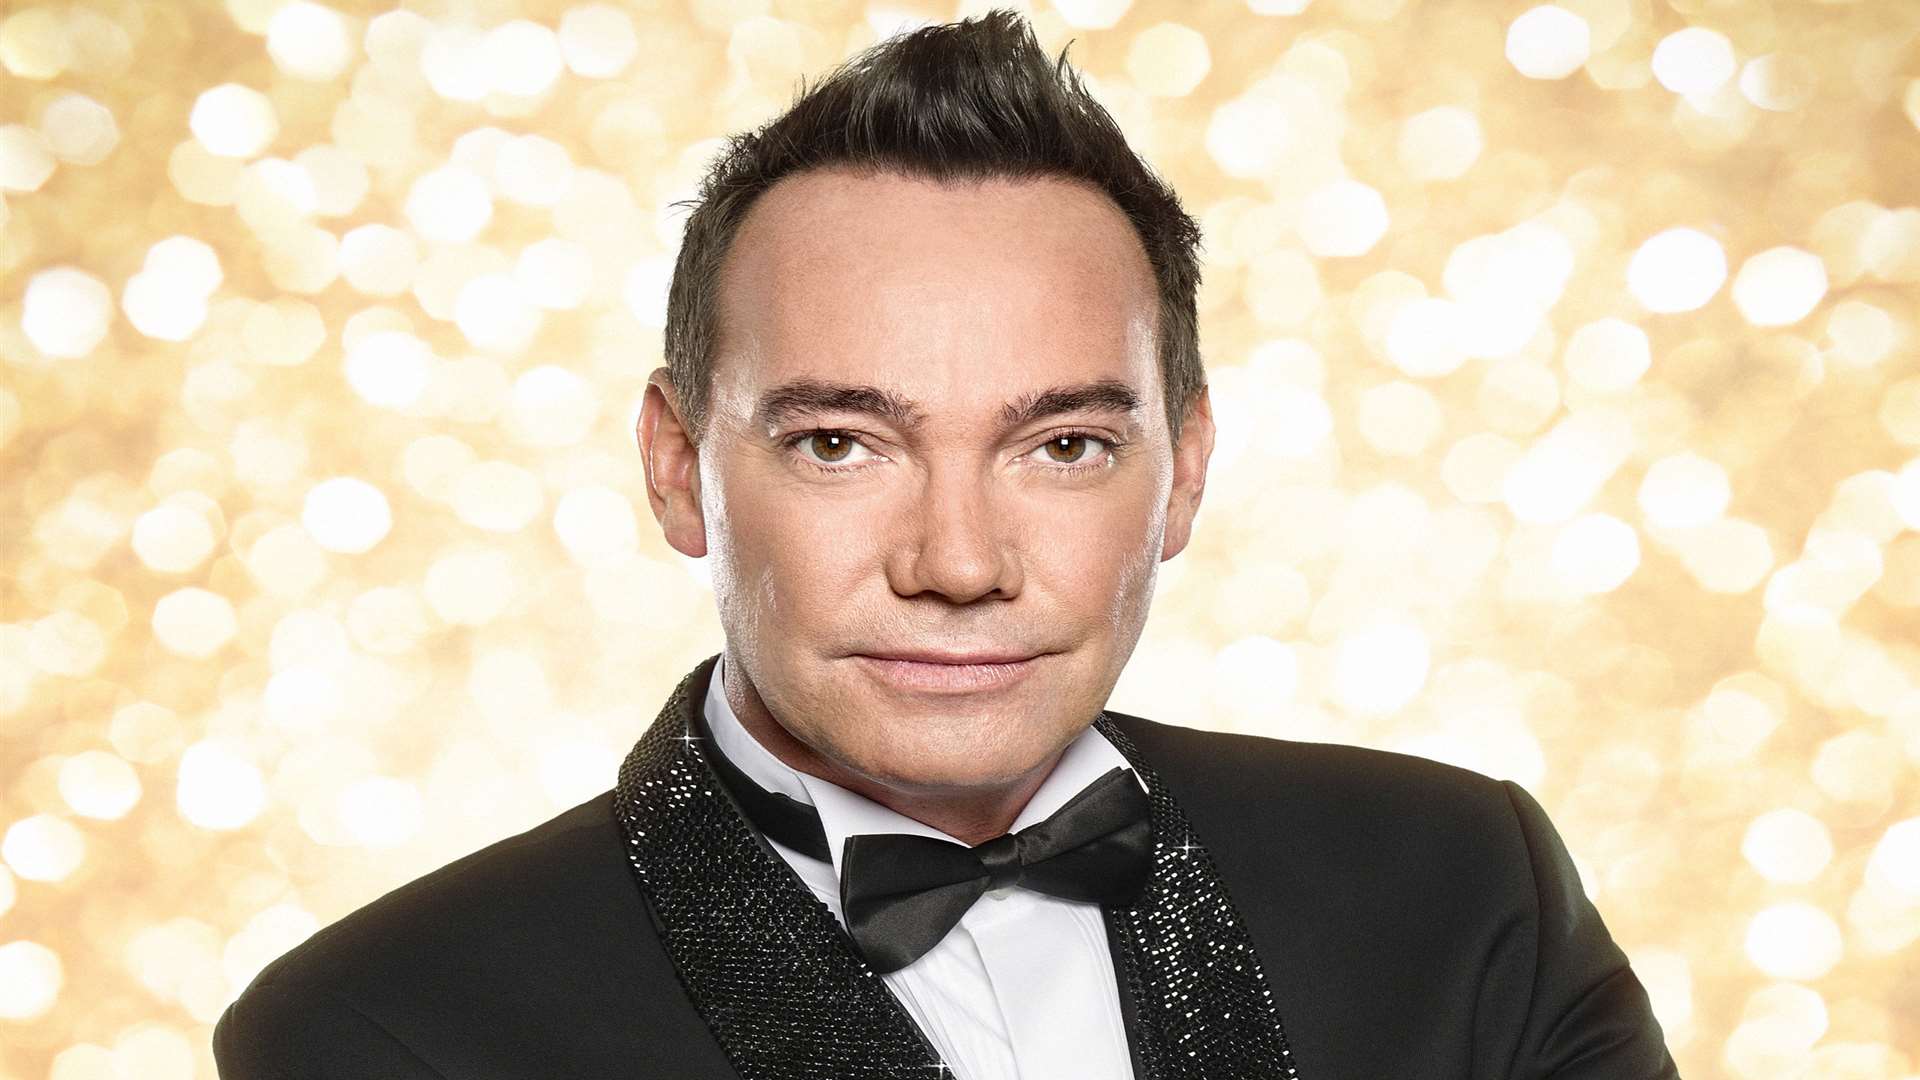 Craig Revel Horwood is the judge all the contestants fear in Strictly